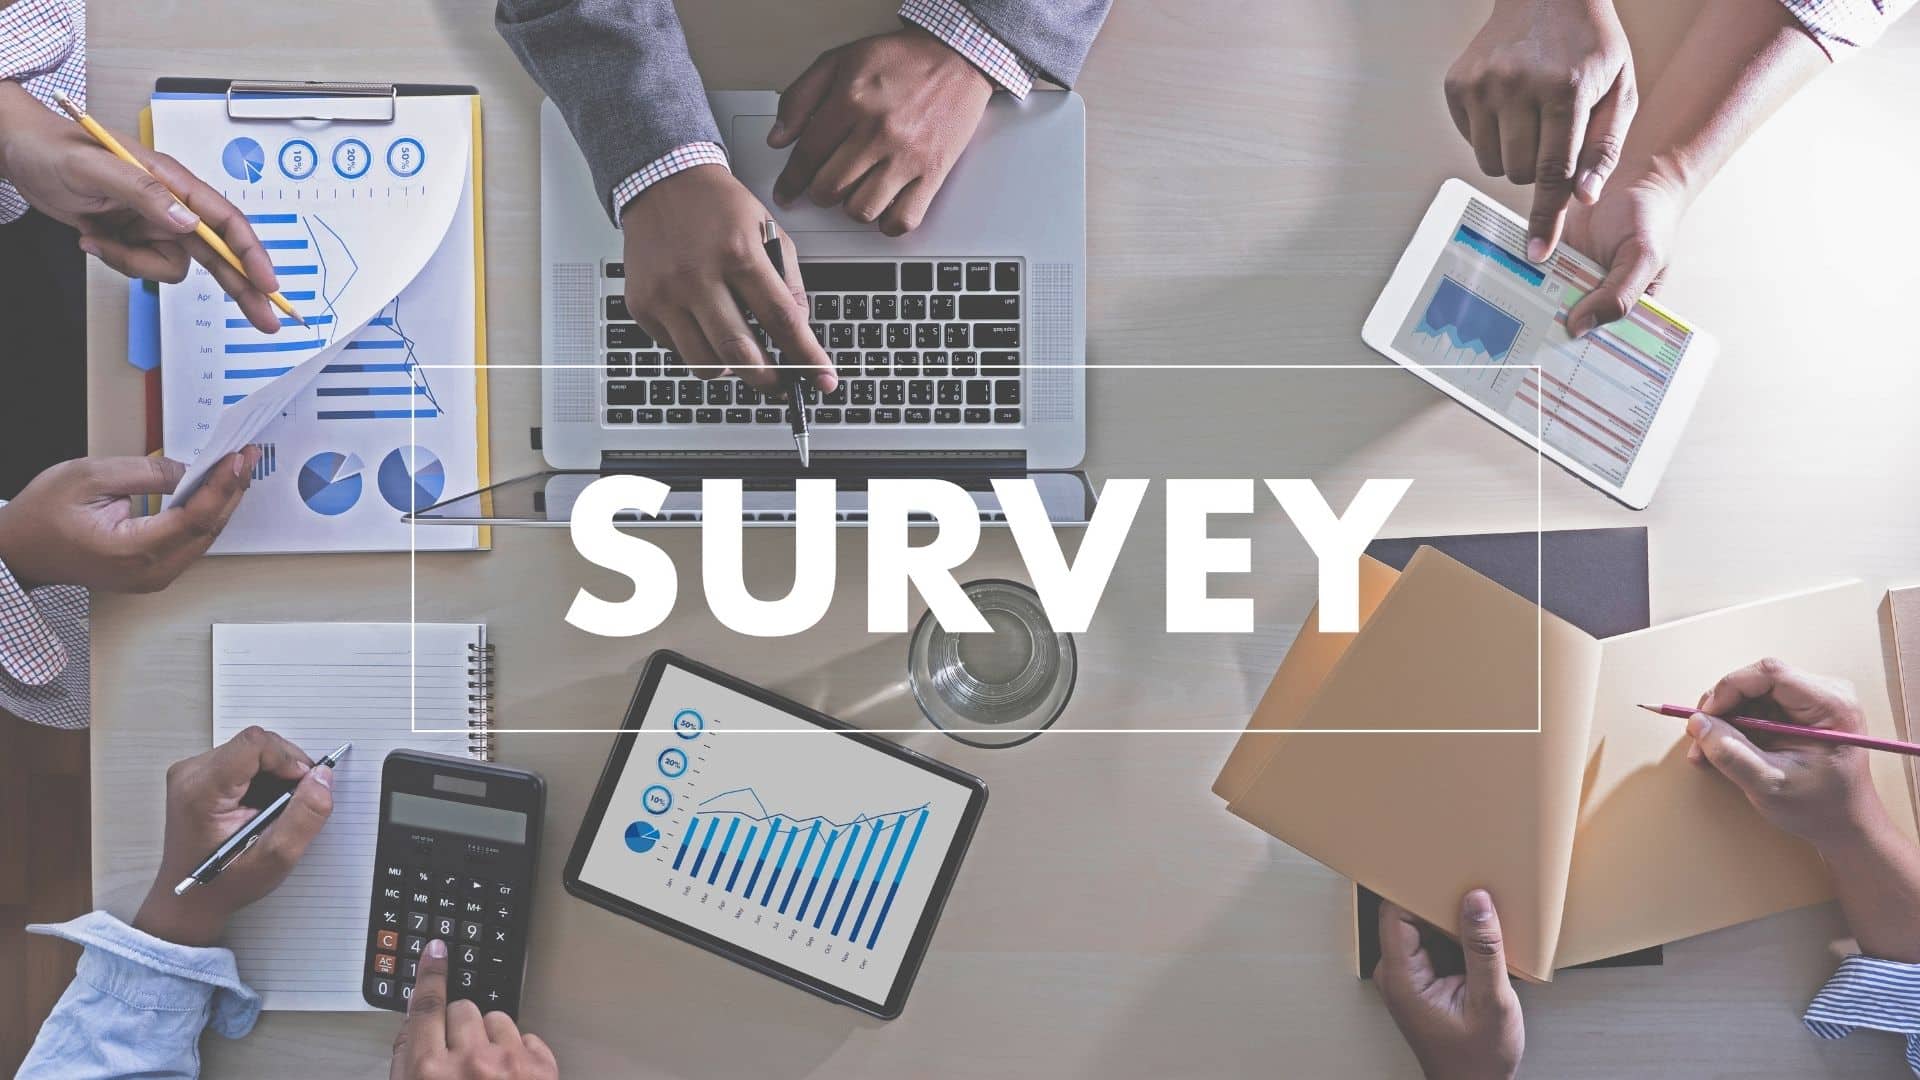 The Results of the 2019 Government Analytics Survey. Are Analytics Important to Government?